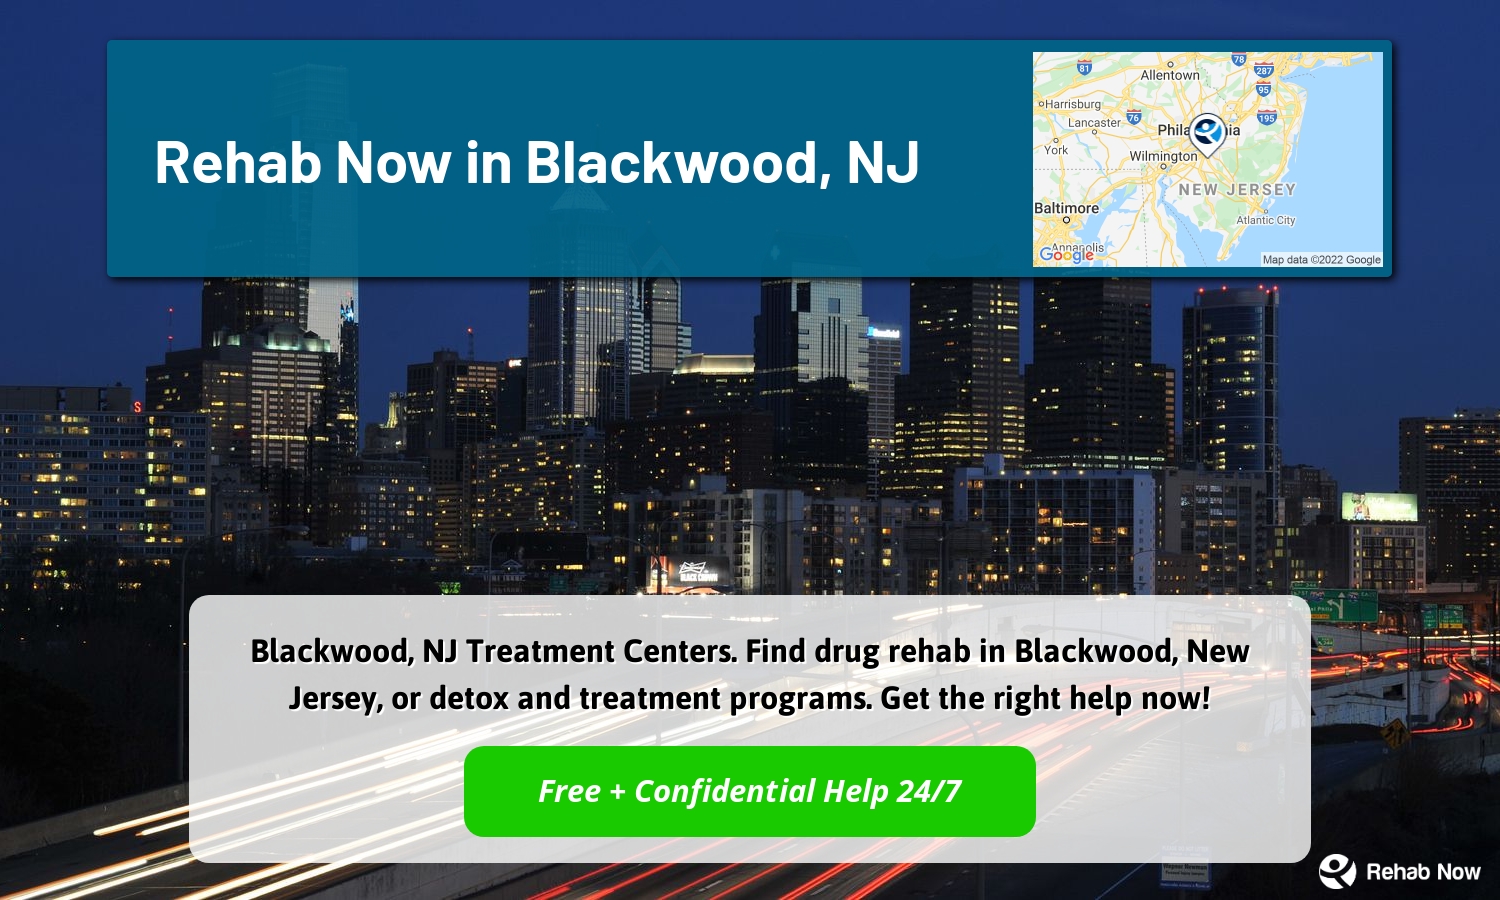 Blackwood, NJ Treatment Centers. Find drug rehab in Blackwood, New Jersey, or detox and treatment programs. Get the right help now!